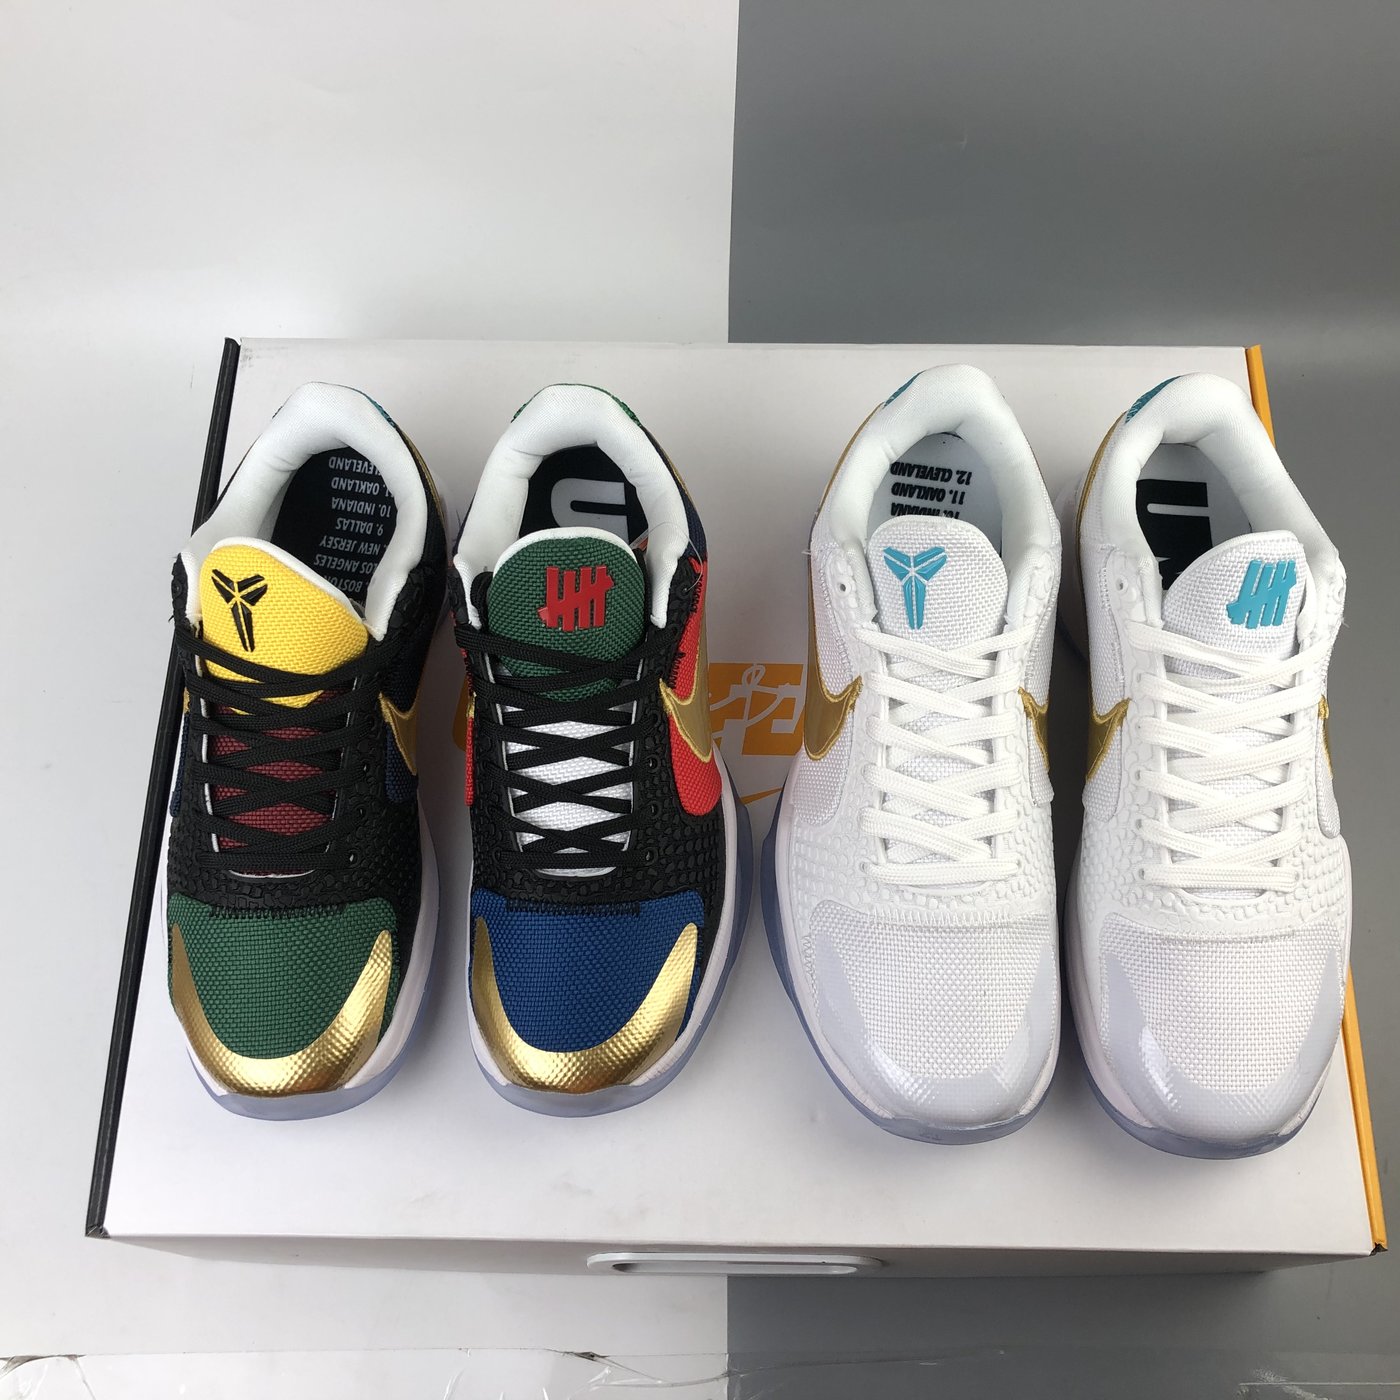 NIKE KOBE 5 V PROTRO UNDEFEATED-PACK WHAT IF 聯名套裝 DB5551-900